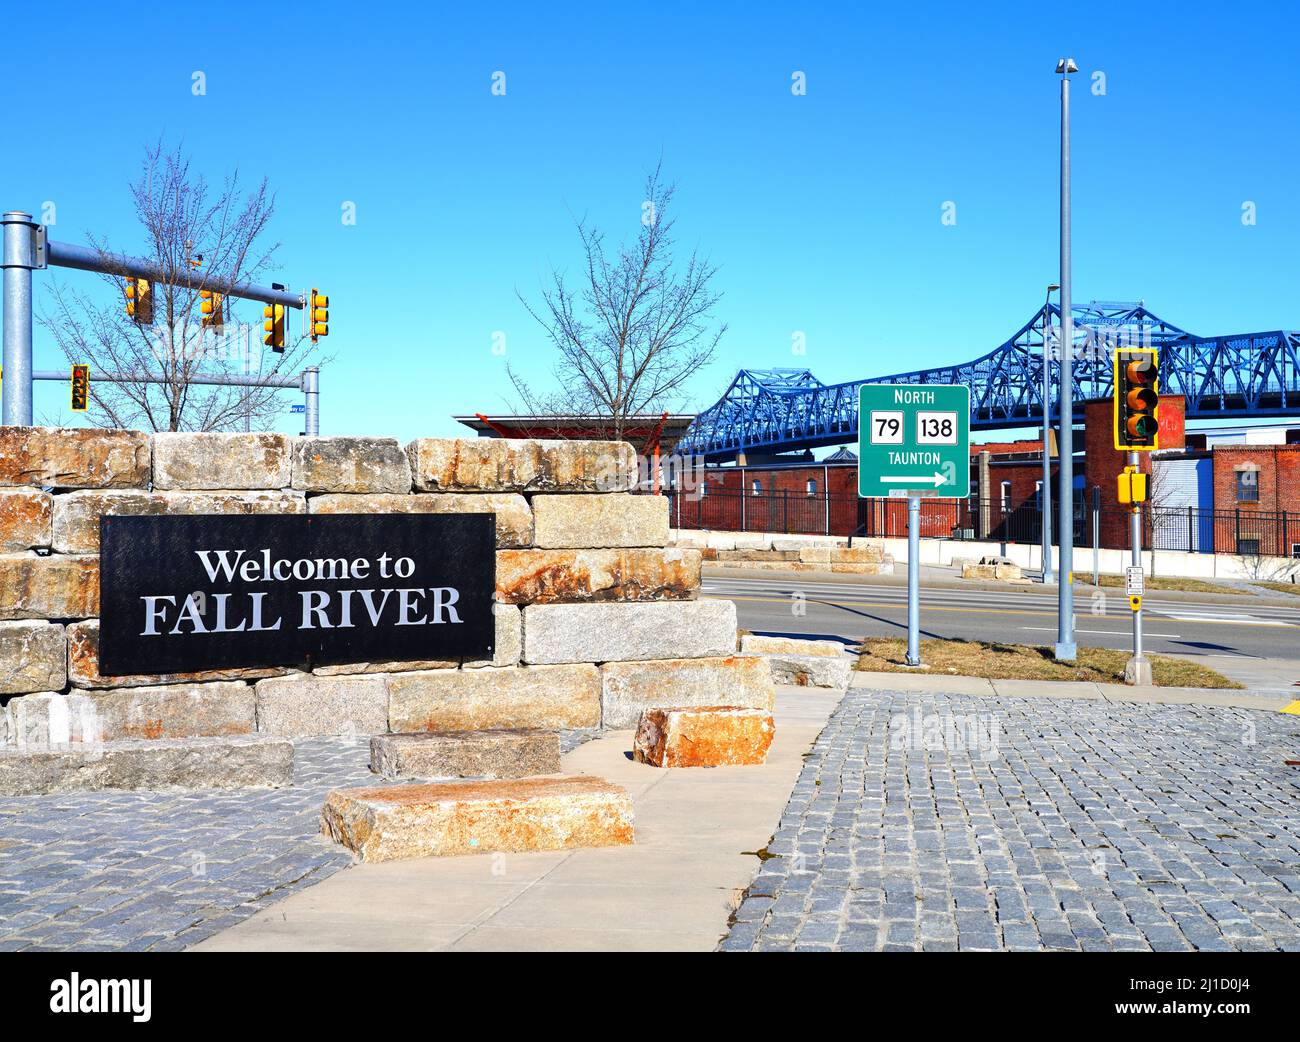 FALL RIVER, MA –5 MAR 2022- View of the town of Fall River, Massachusetts, an old industrial town known for the Lizzie Borden murder in the 19th centu Stock Photo